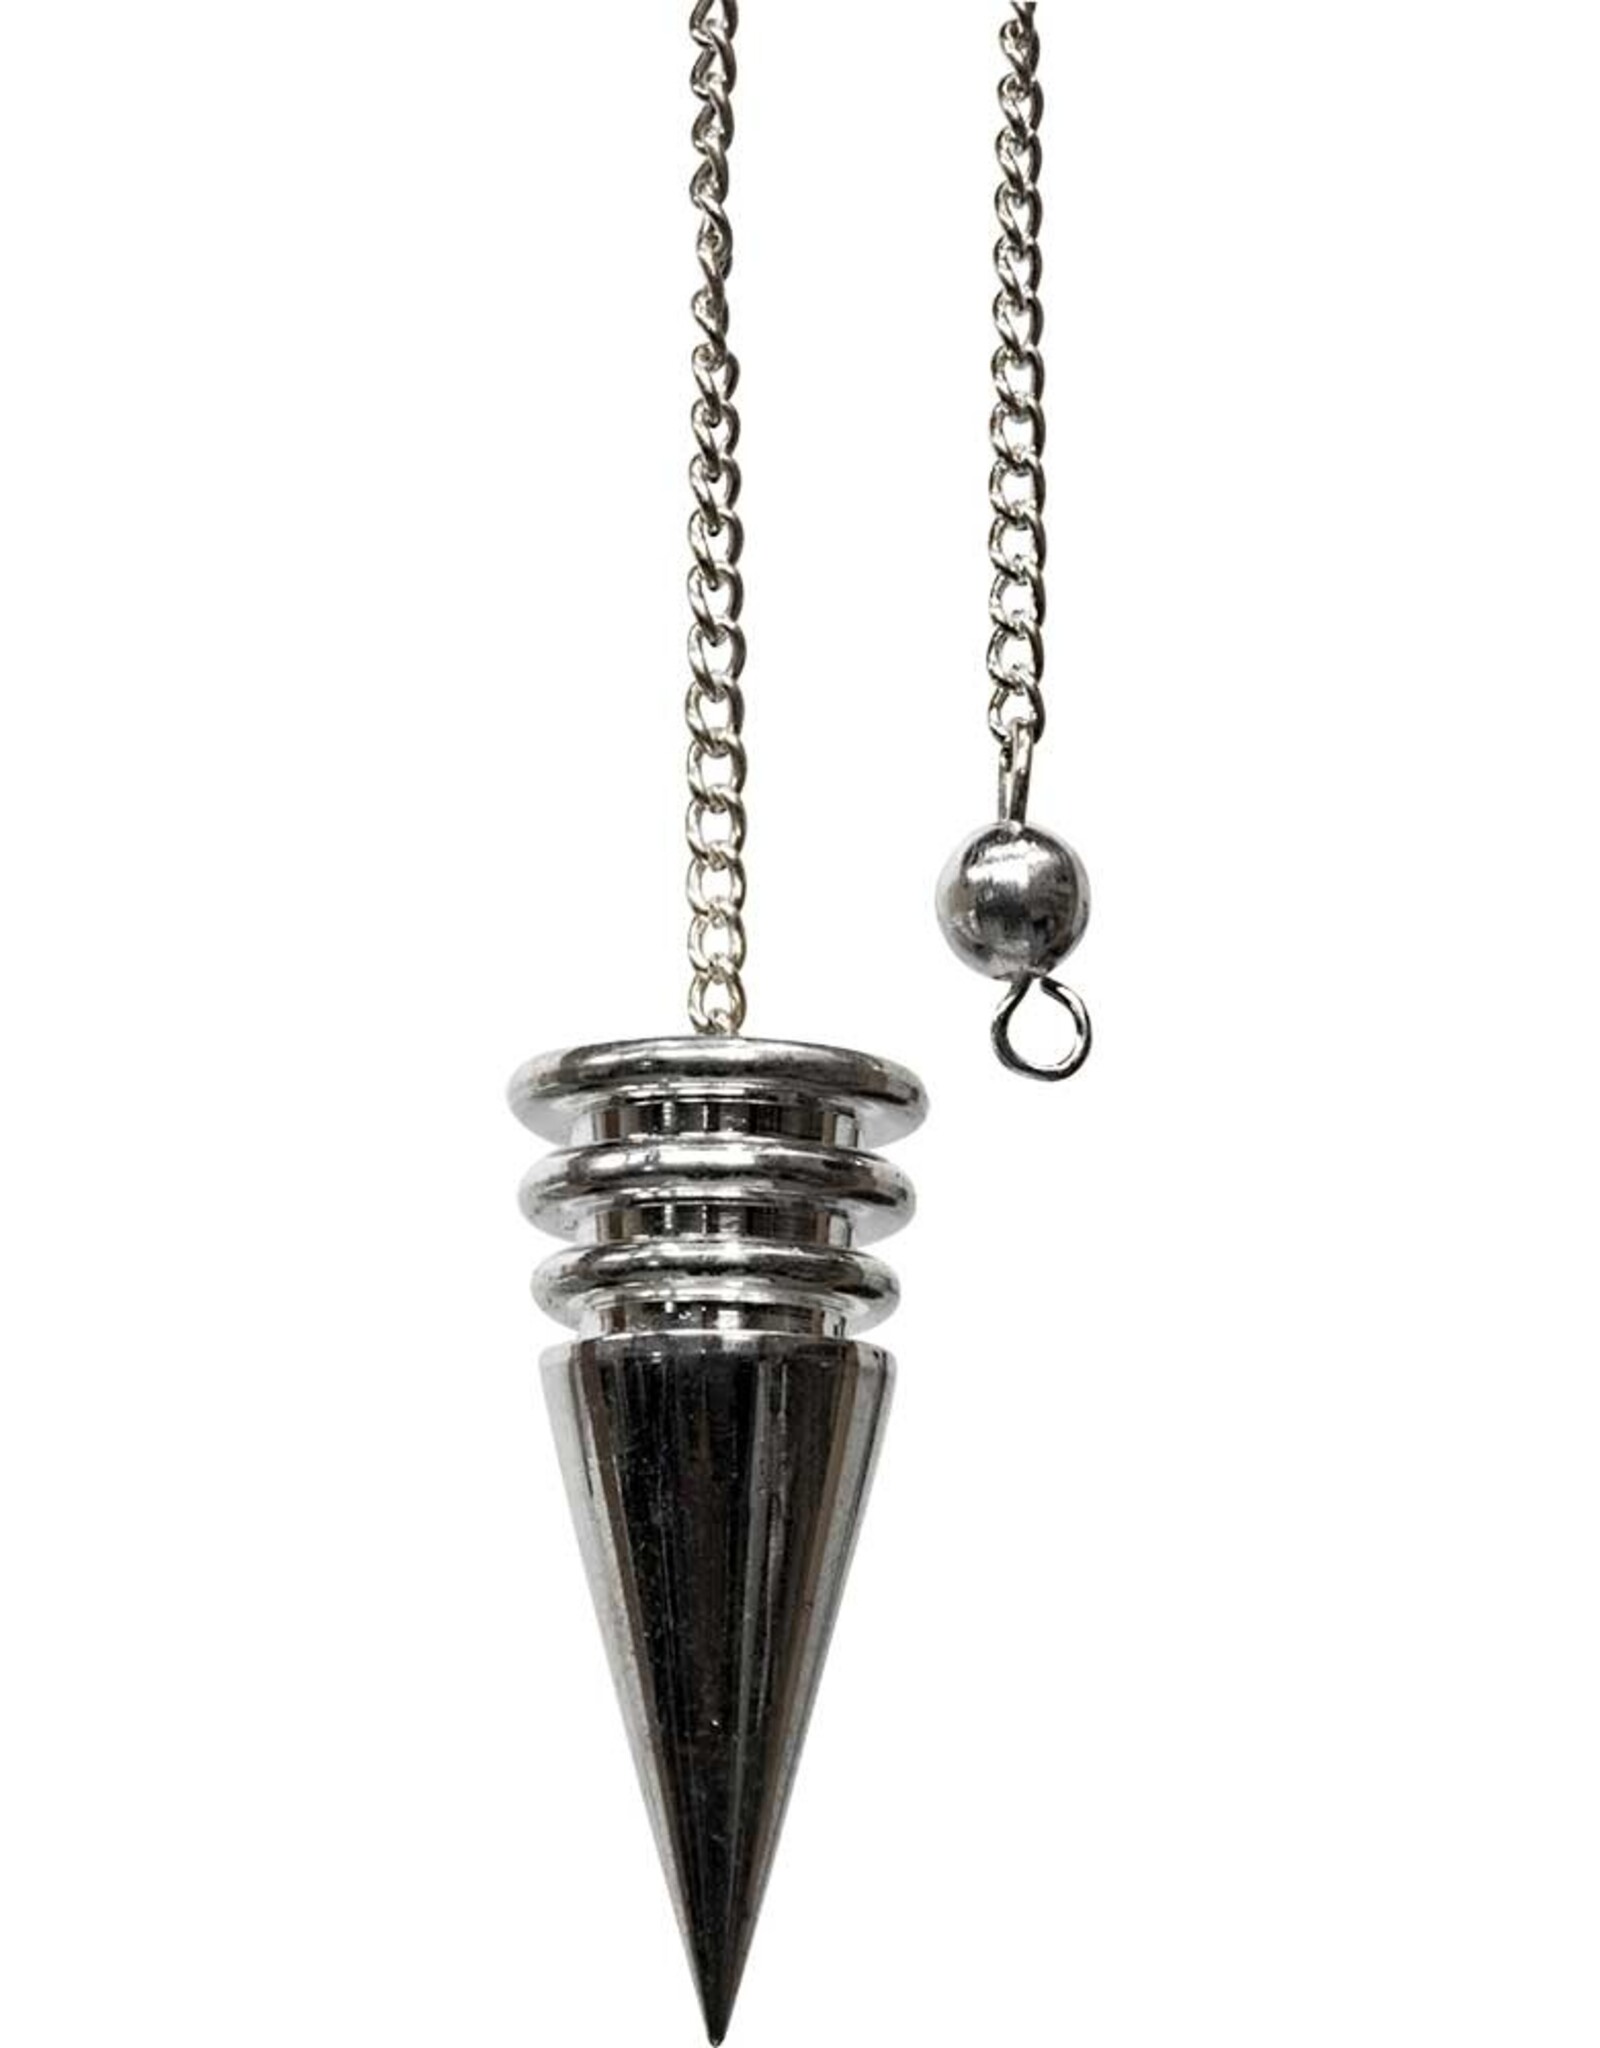 PENDULUM CHAMBERED-SILVER PLATED POINT